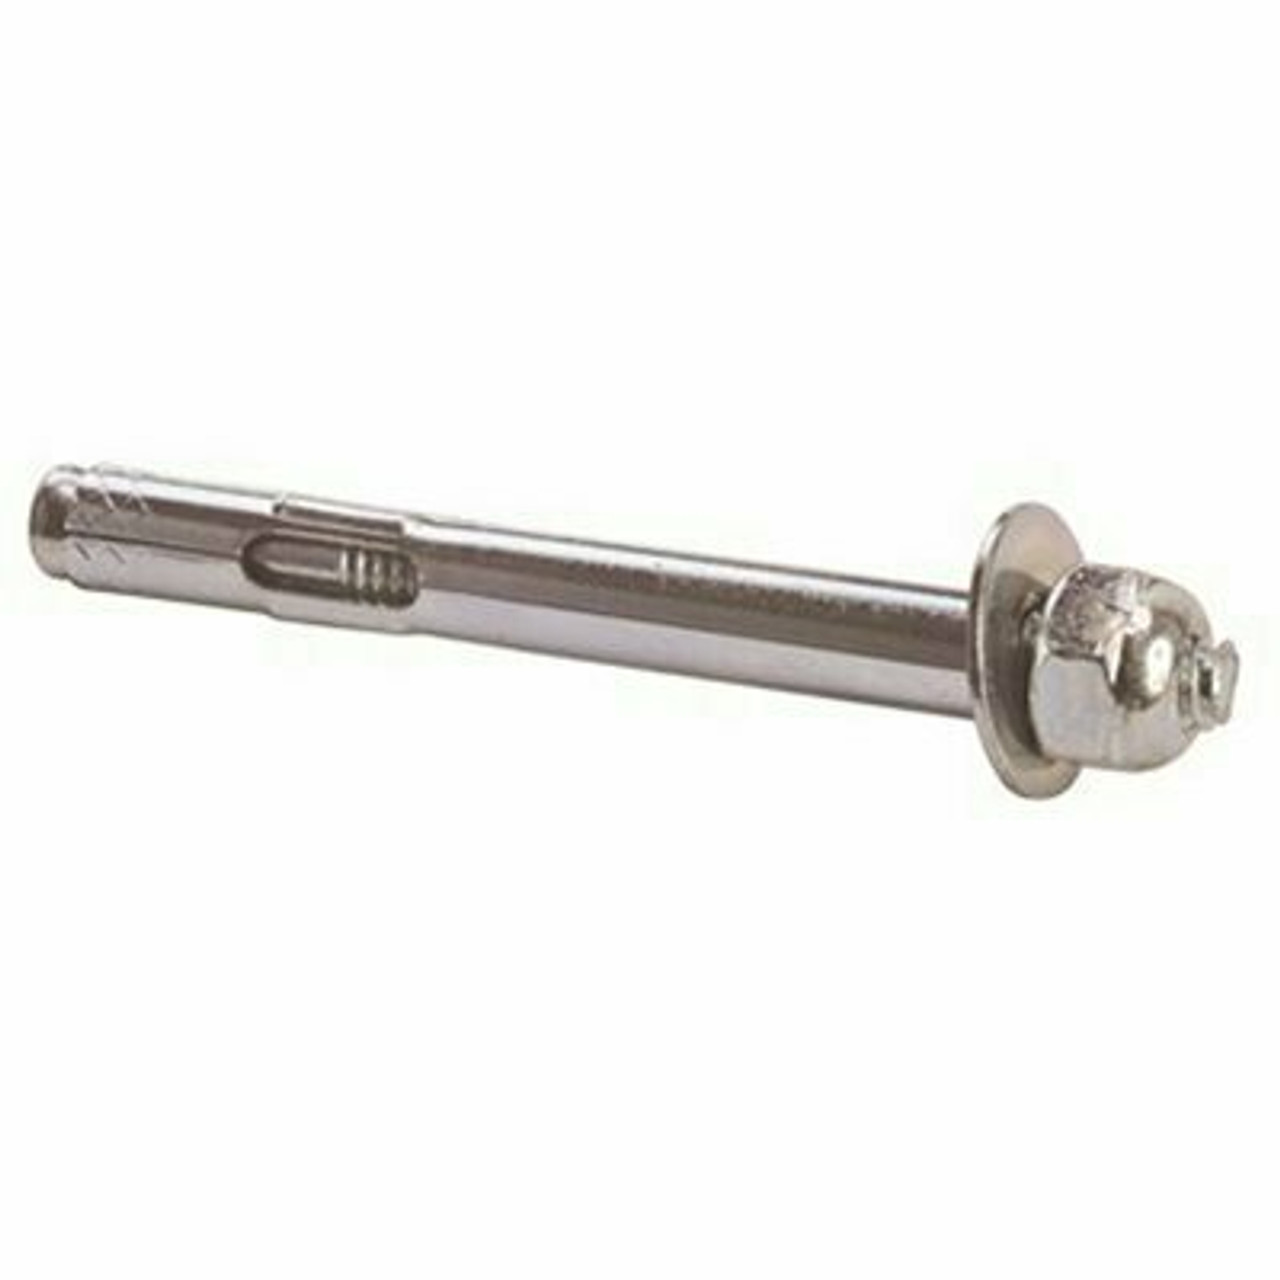 Lindstrom Hodell-Natco Sleeve Wall Anchors, 1/2 X 3 In.